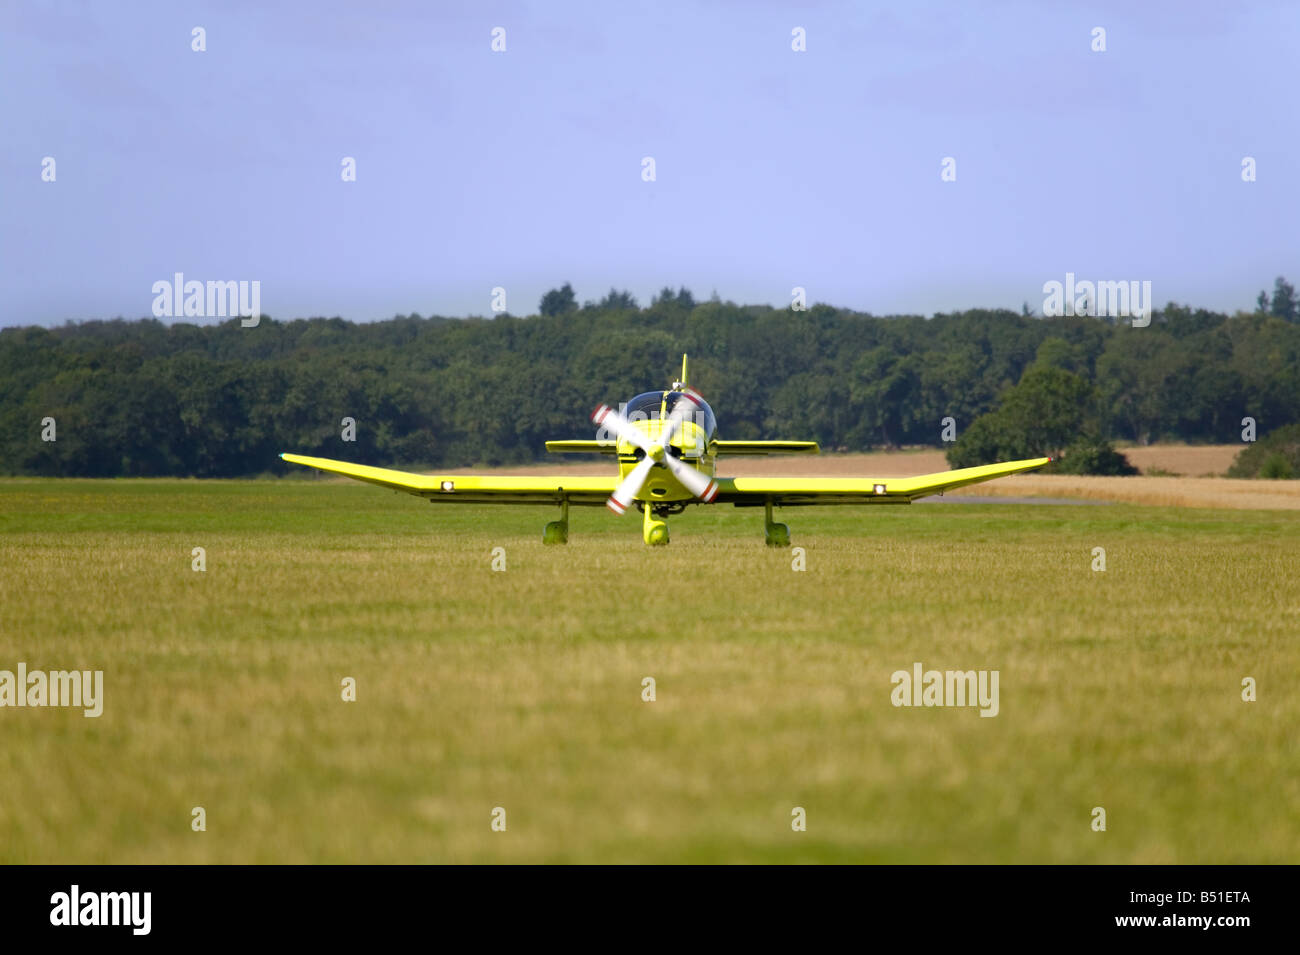 A yellow single propeller light aircraft taxiing on grass Stock Photo